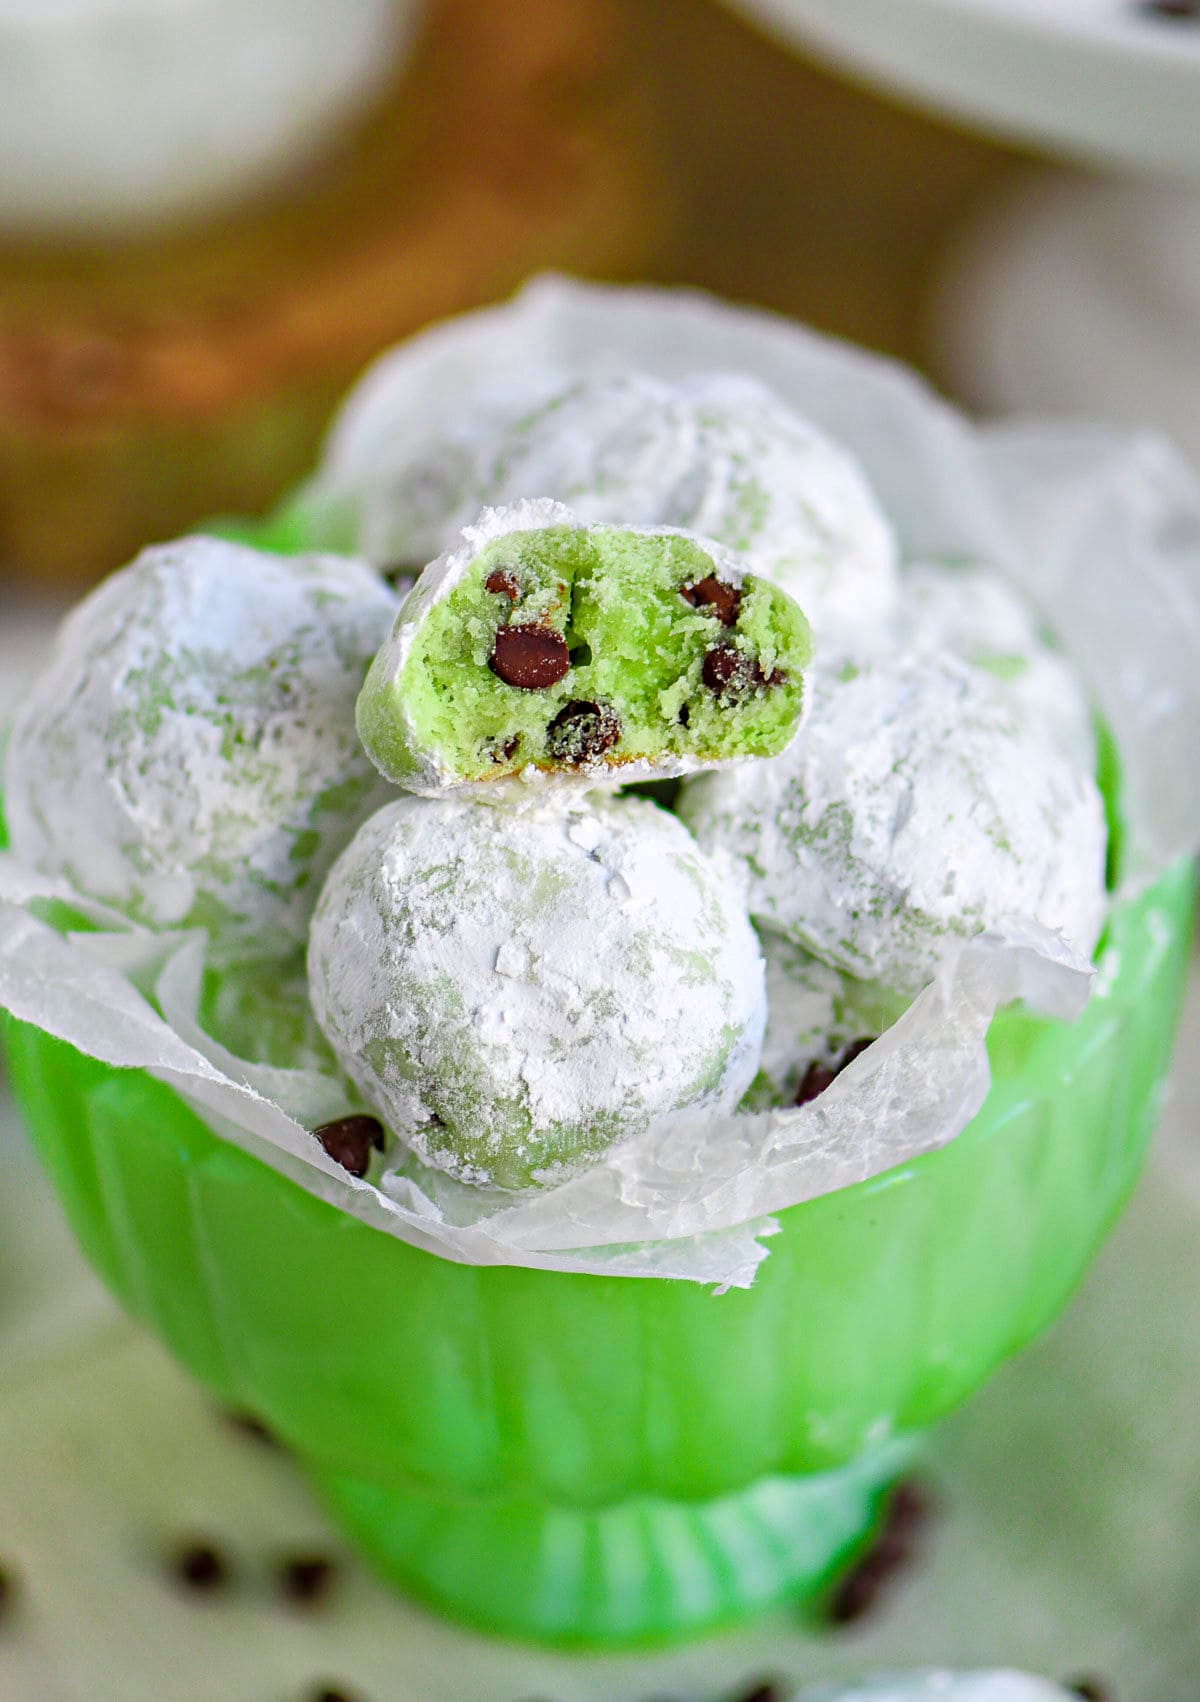 mint chocolate chip snowball cookies in a small green glass pedestal bowl lined with wax paper. One cookie is broken in half to show the green interior and mini chocolate chips.